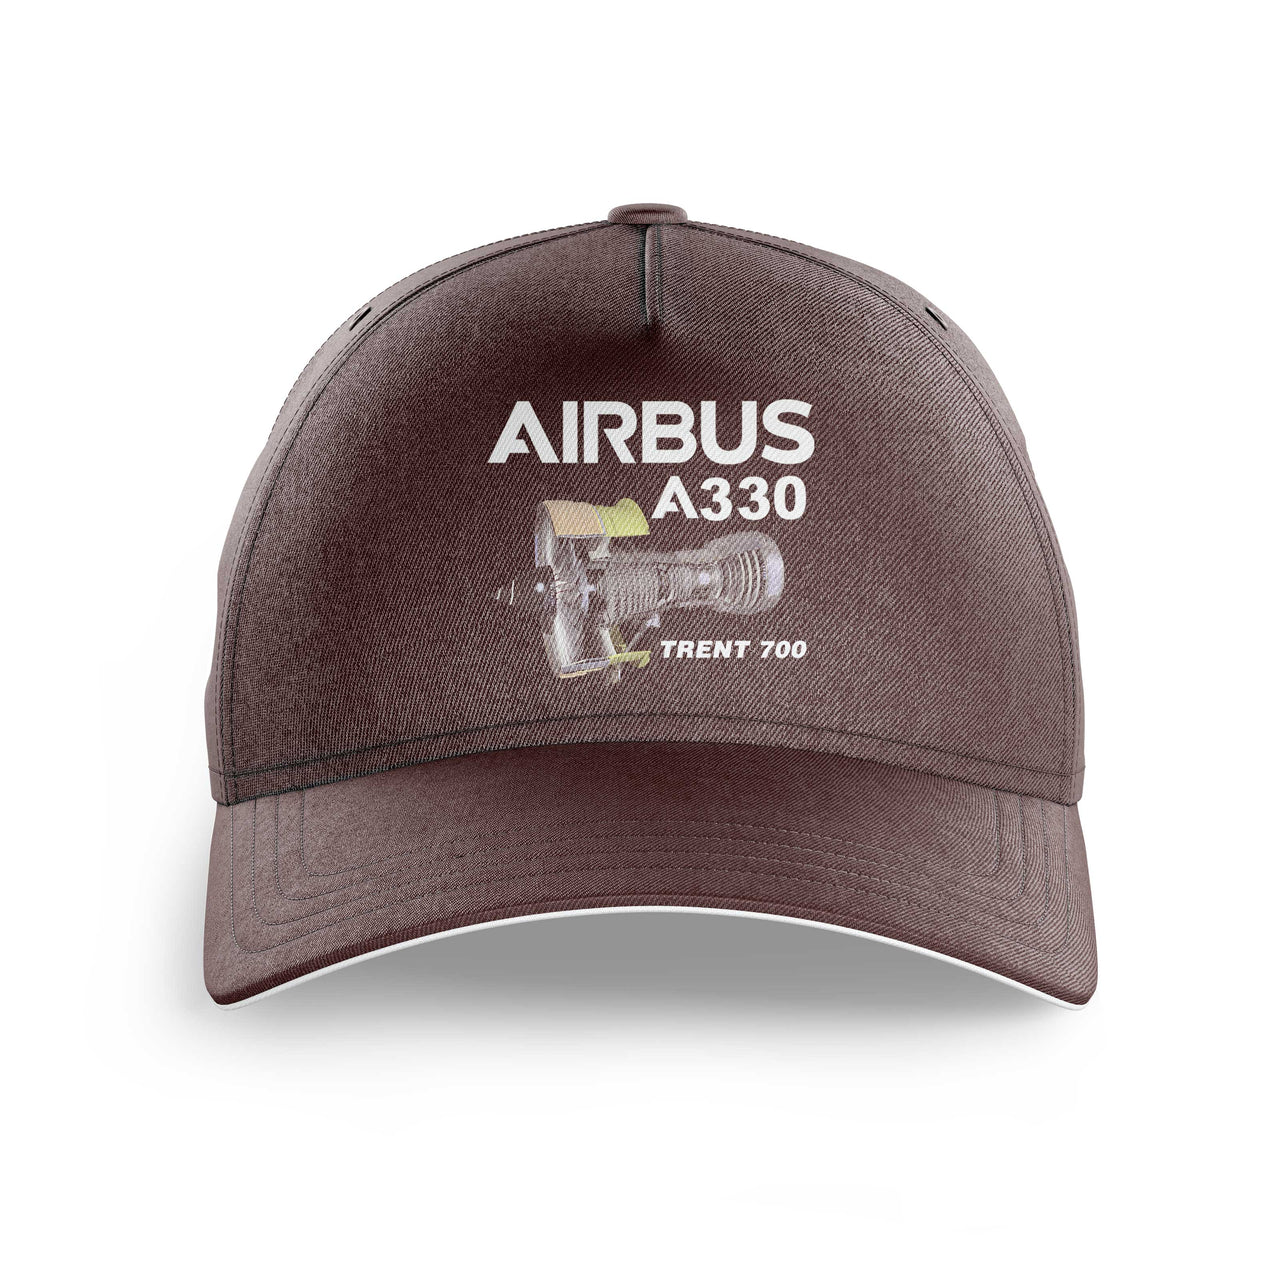 Airbus A330 & Trent 700 Engine Printed Hats